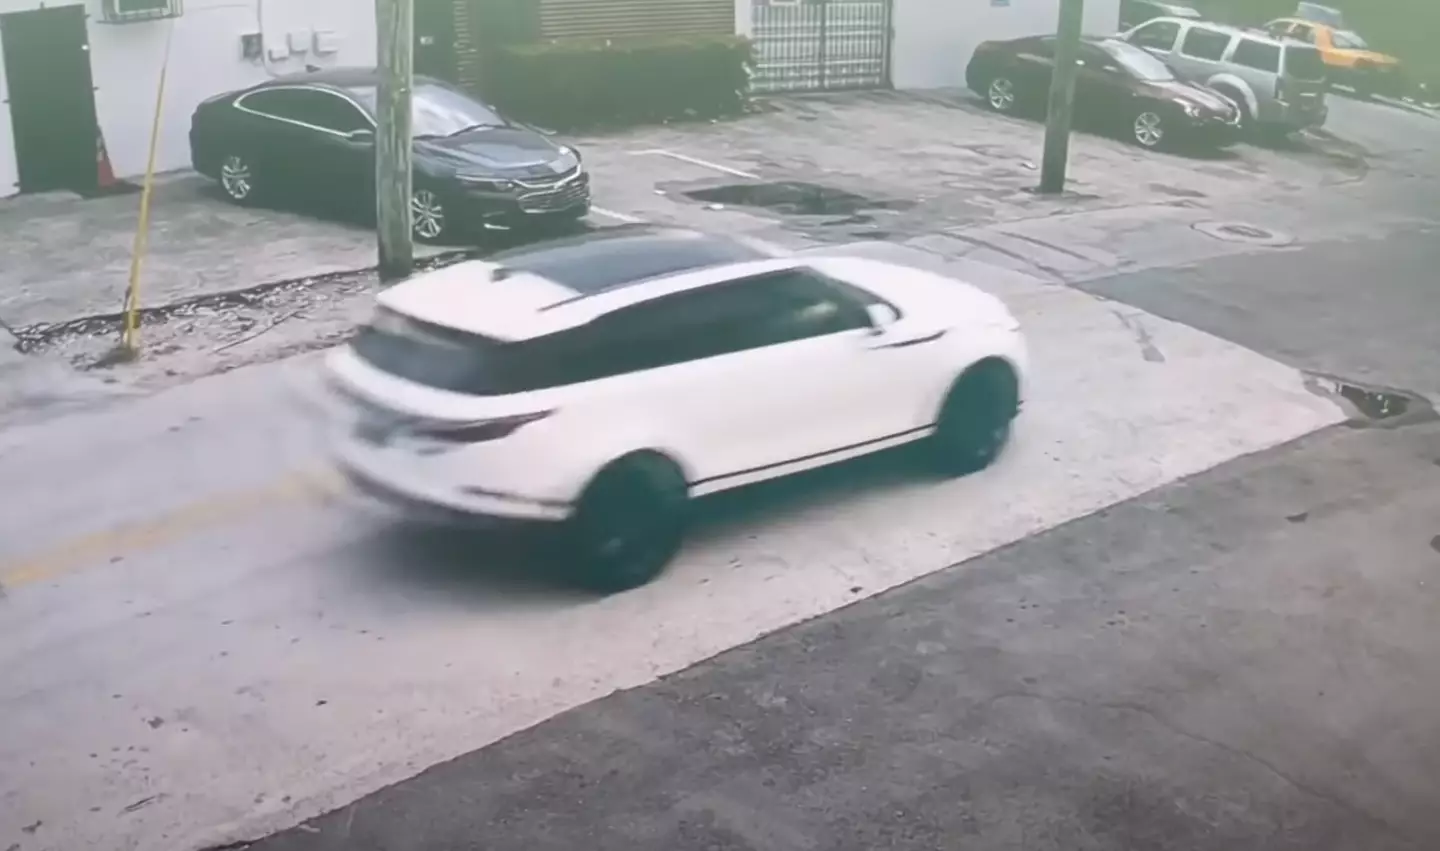 Surveillance footage captured a Range Rover arriving at and leaving her apartment complex.